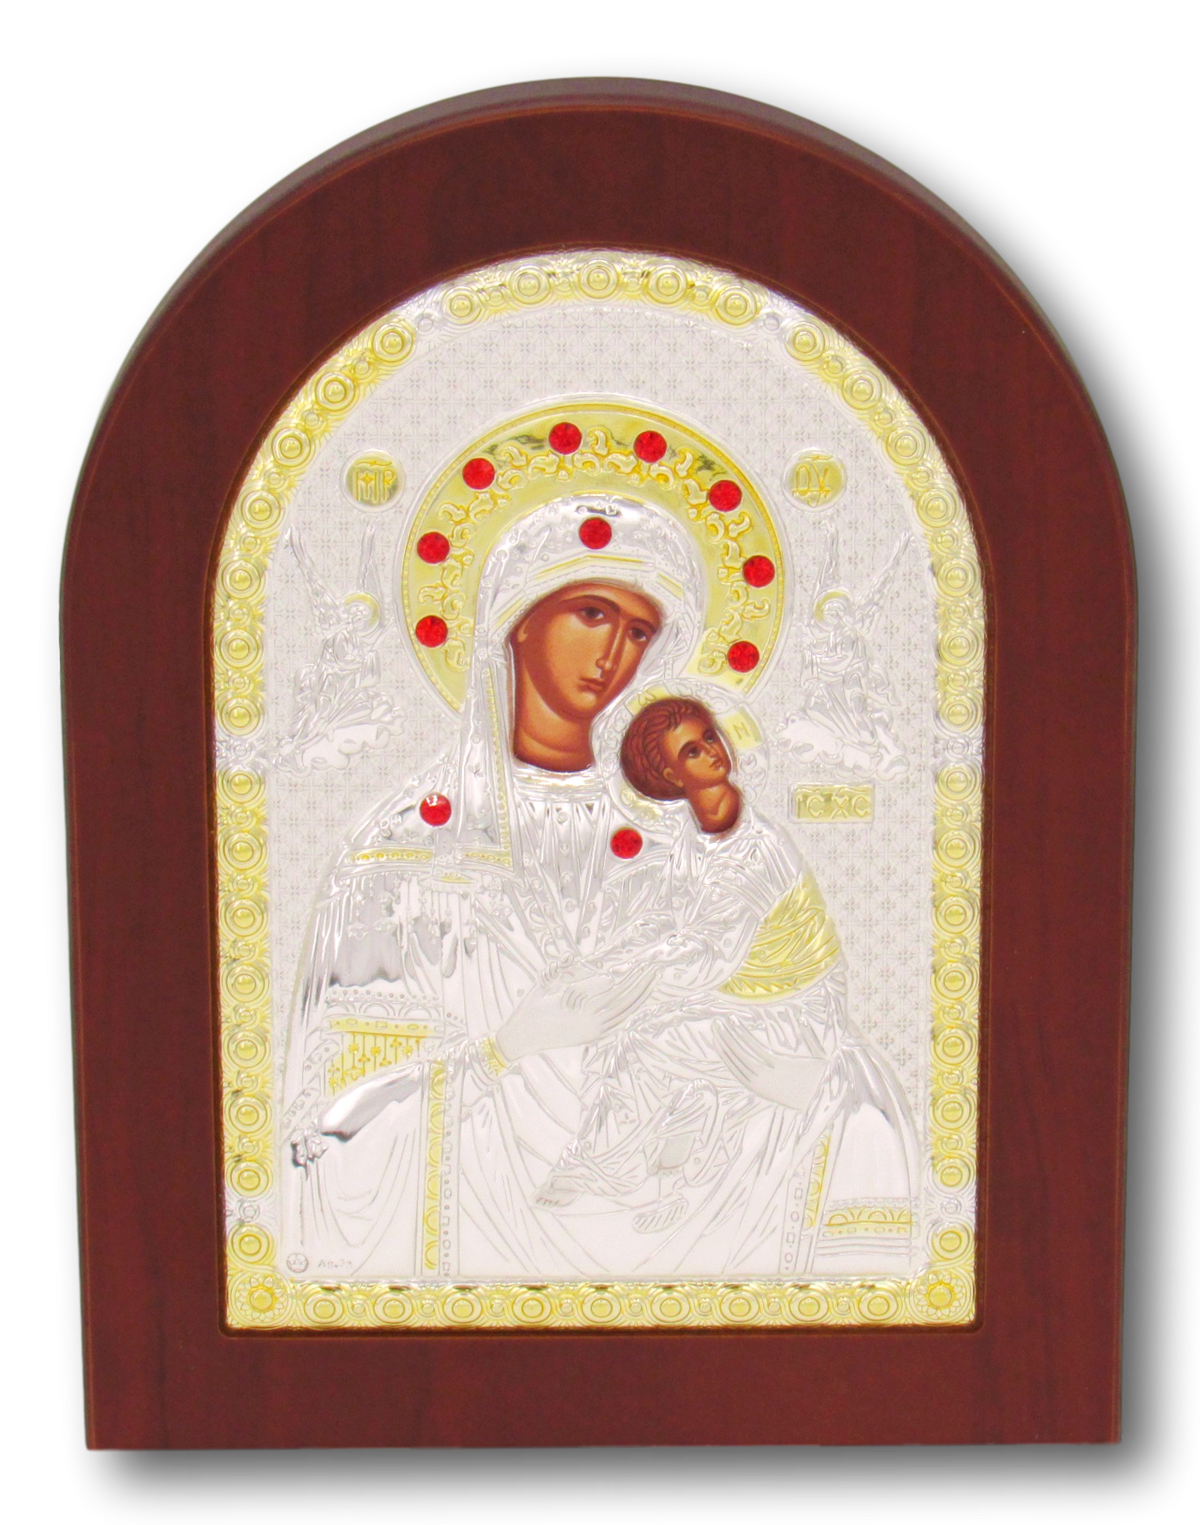 Icon of Madonna & Child, Stirling silver, with brown frame, Size: 6" x 8"